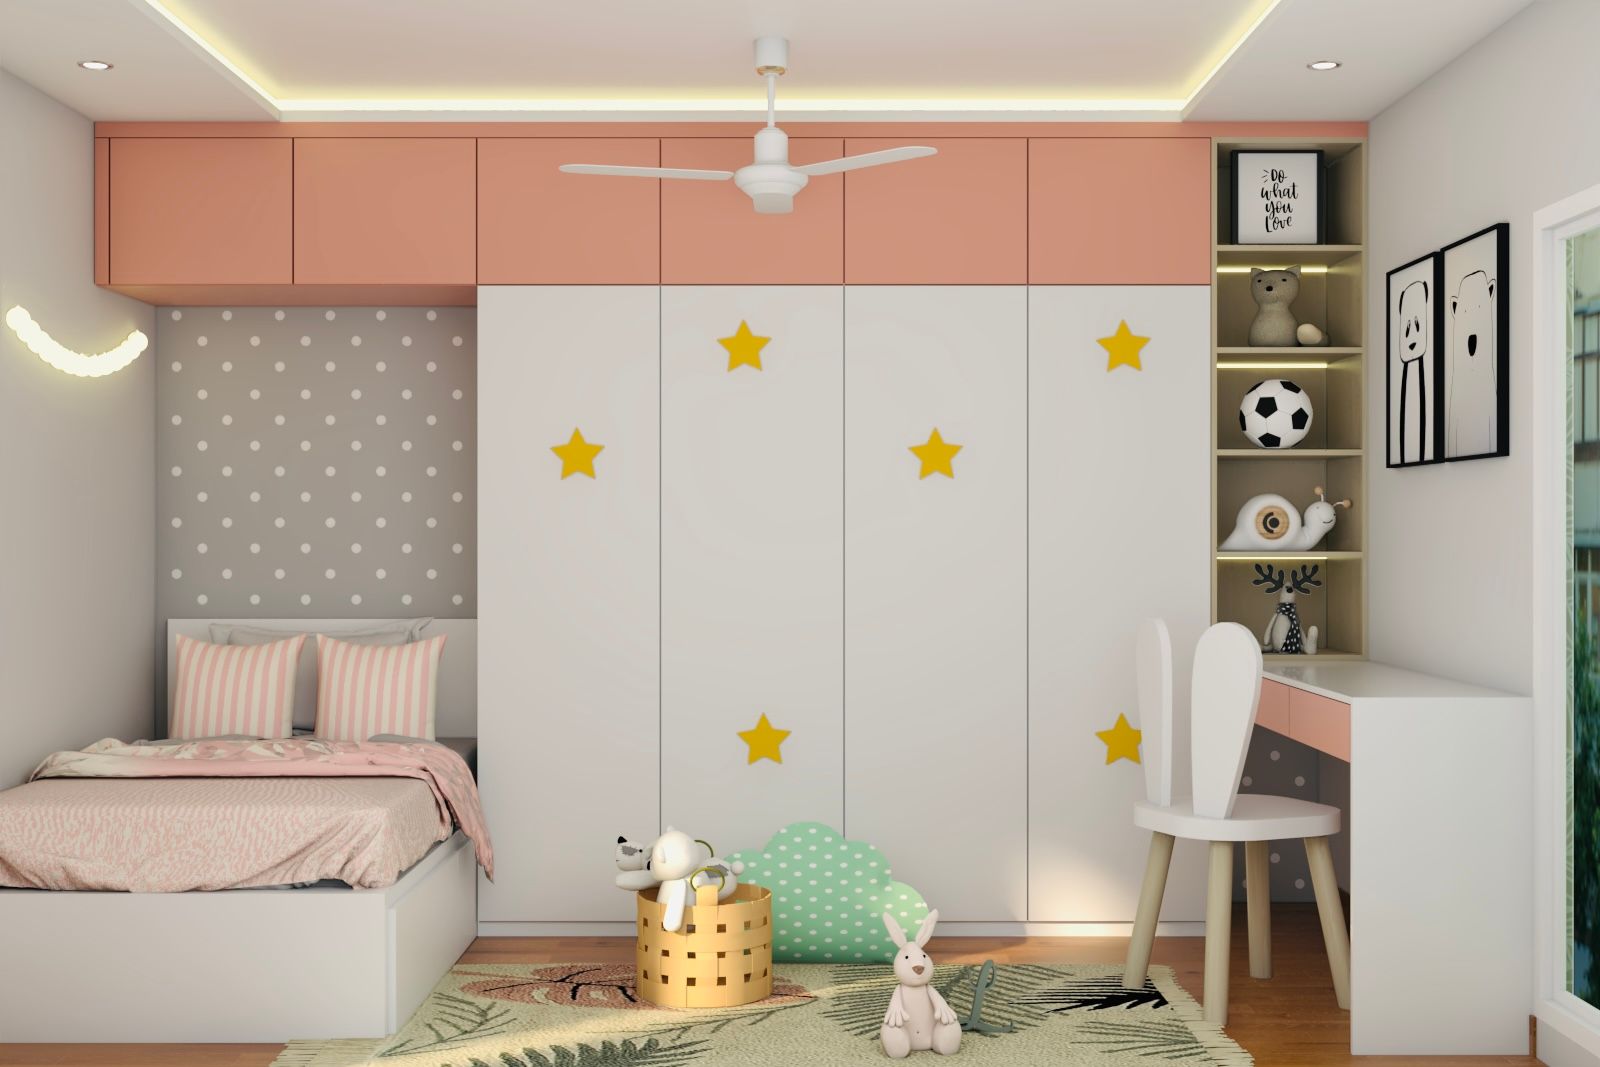 Contemporary 4-Door Swing Wardrobe with Lofts in White and Peach with Yellow Stars Laminate Finish